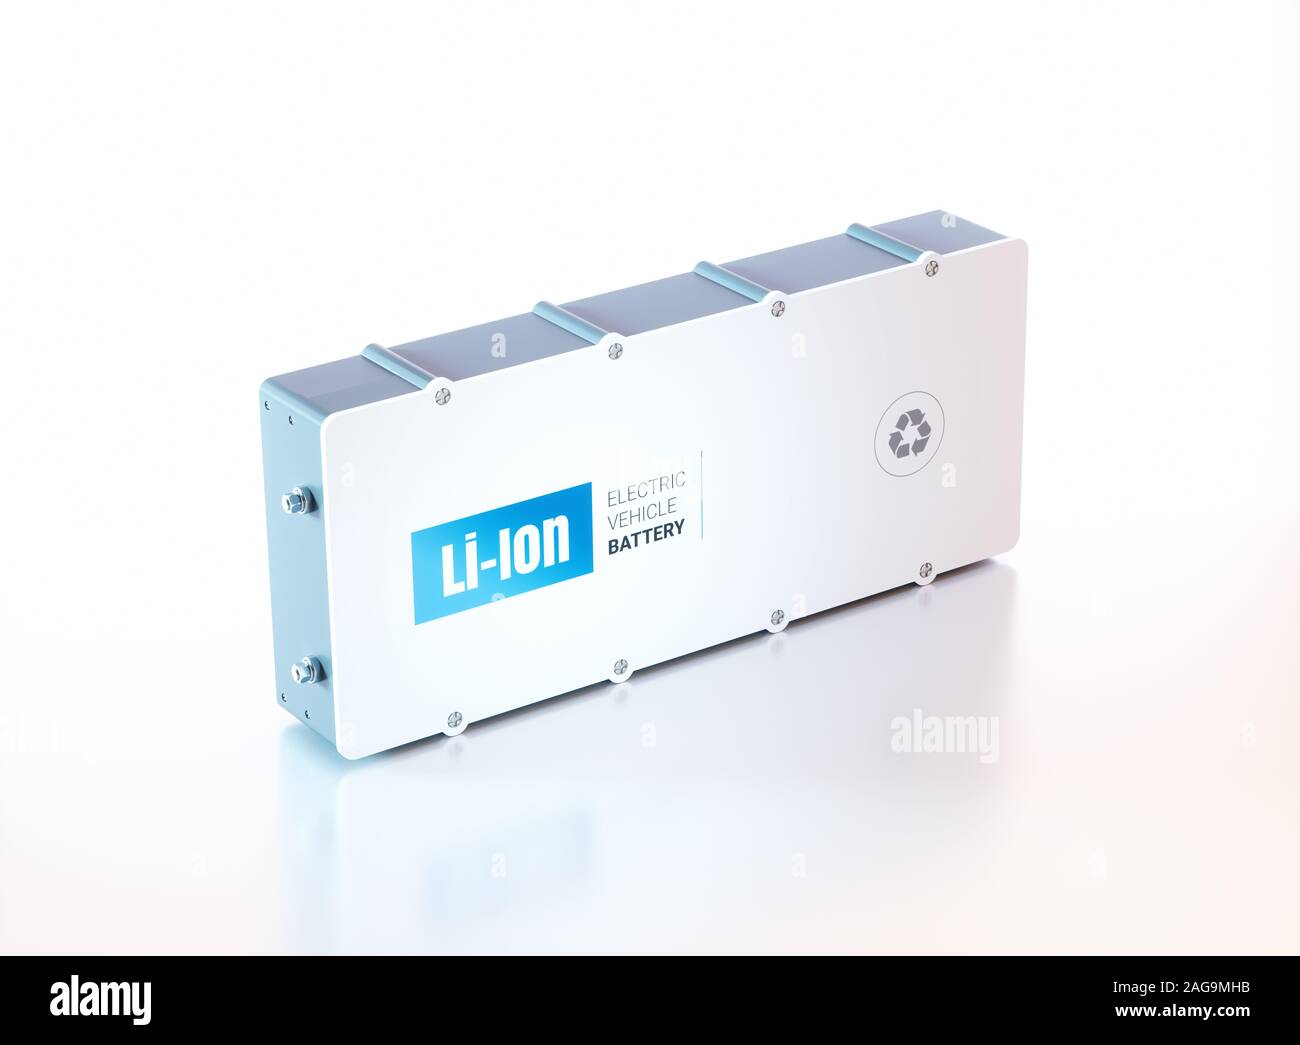 Li-Ion electric vehicle battery. 3d rendering. Stock Photo